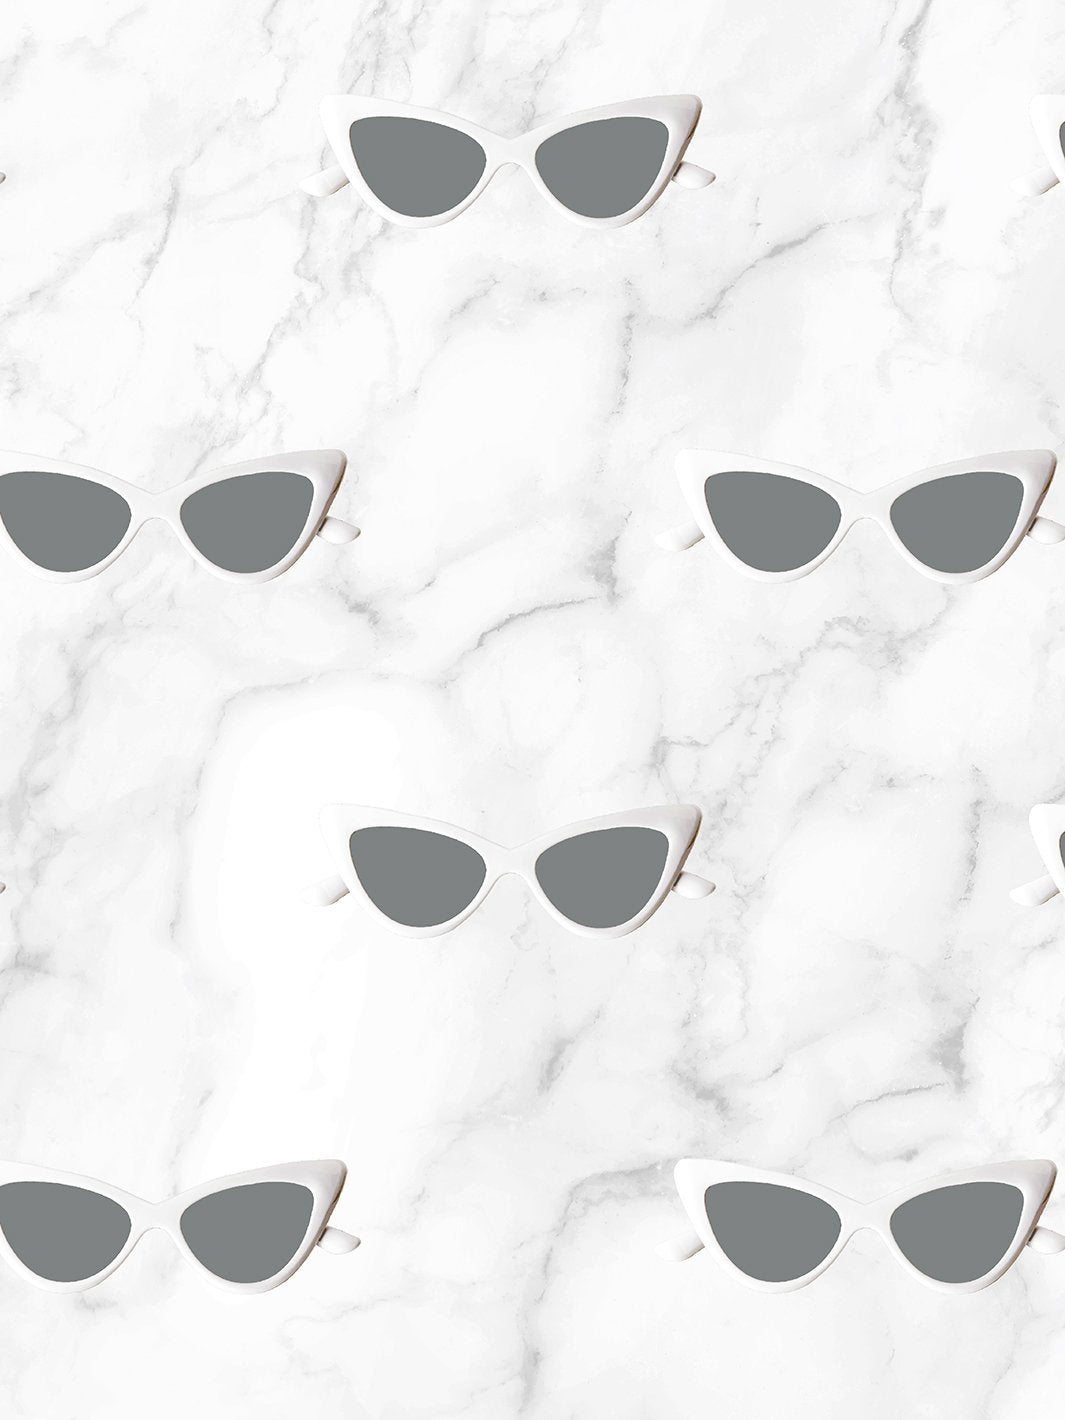 'BarbieStyle™ Sunnies' Wallpaper by Barbie™ - White